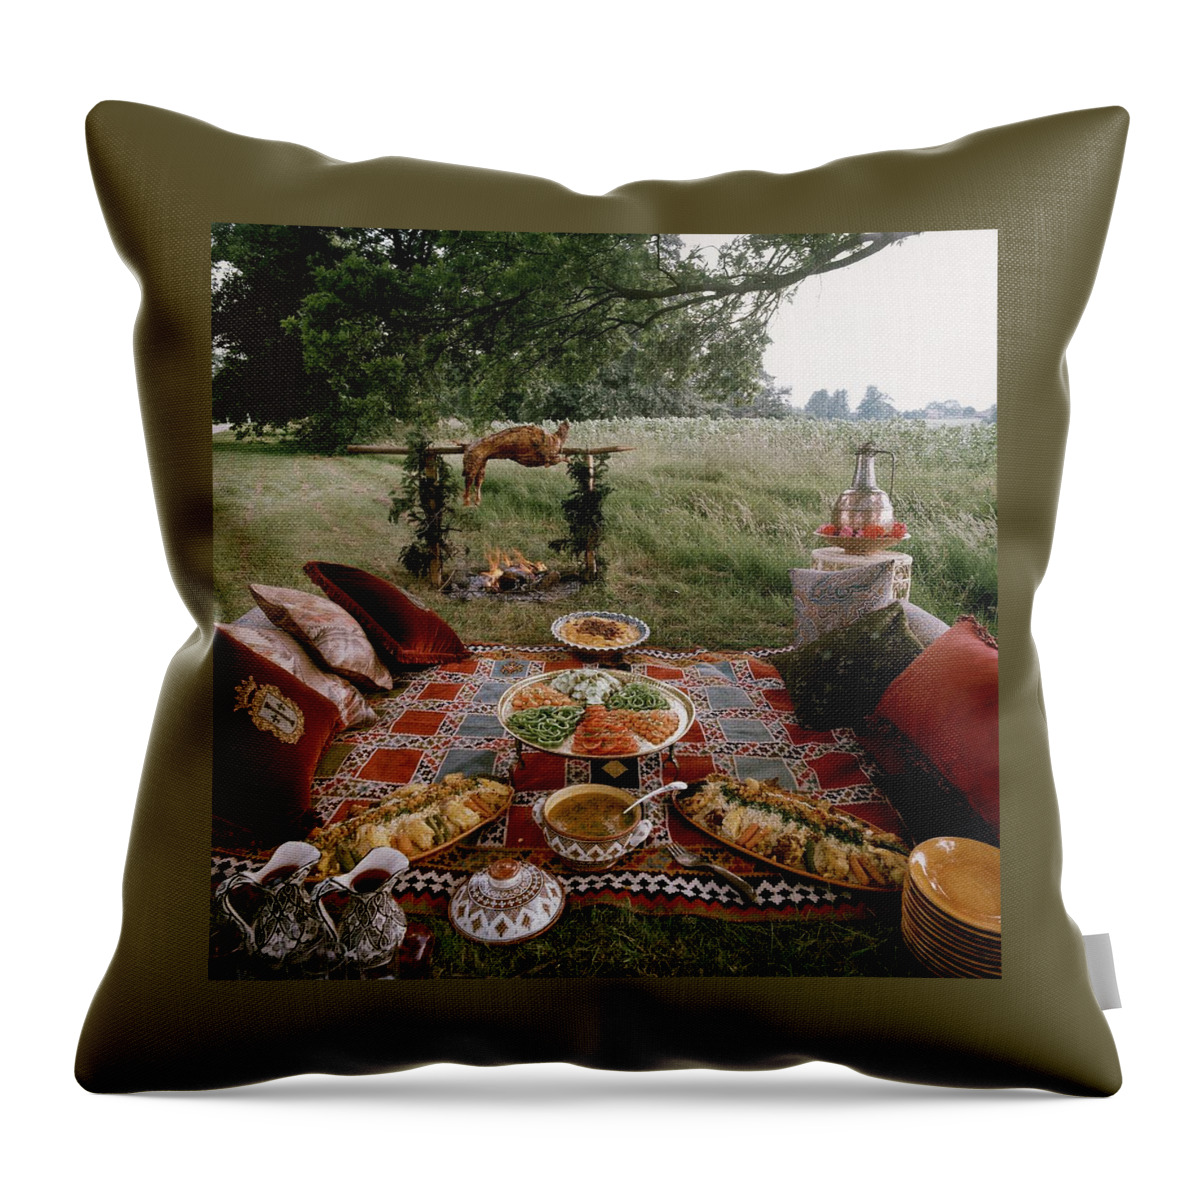 Robert Carrier's Moroccan Picnic In A Field Throw Pillow